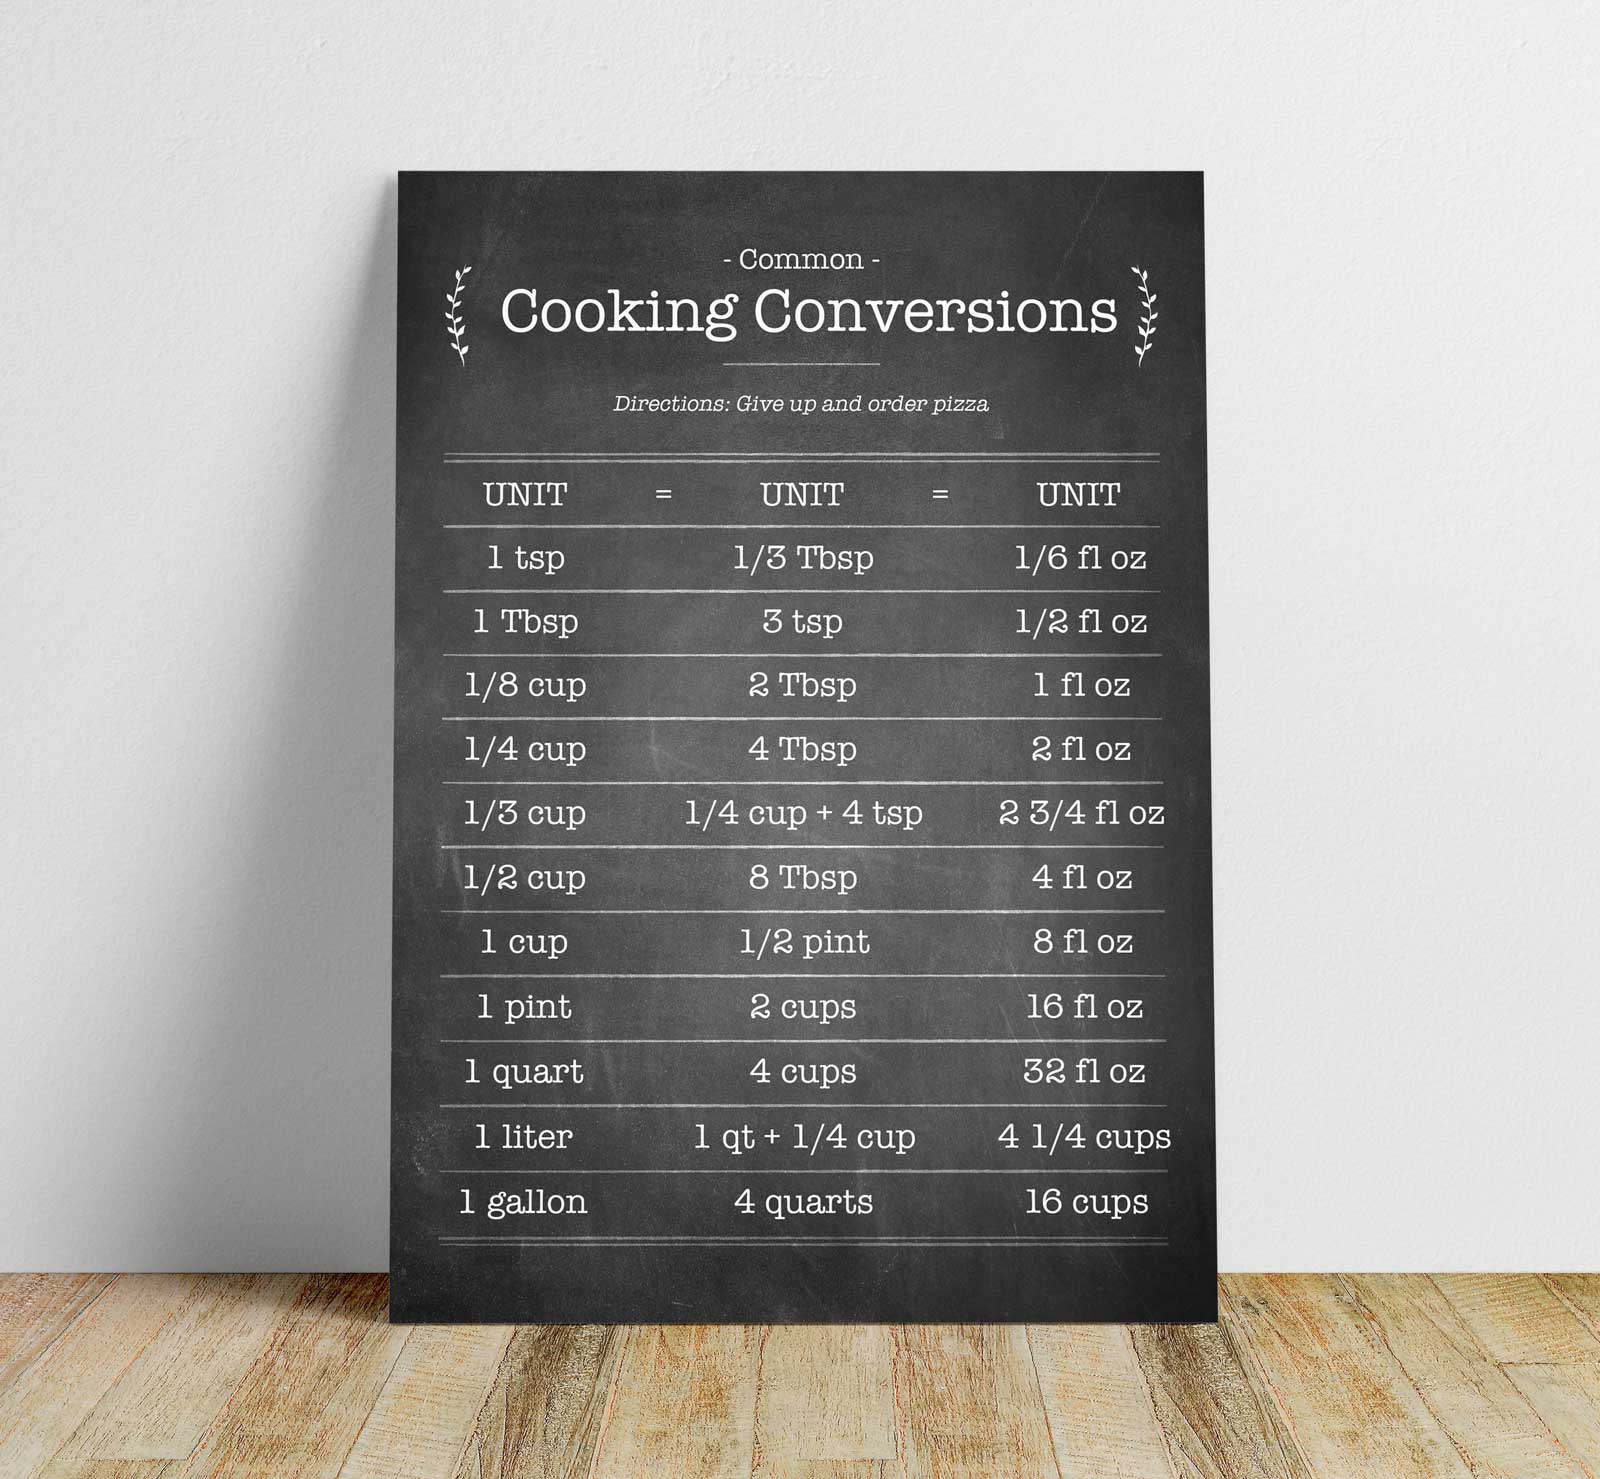 Cooking conversions 